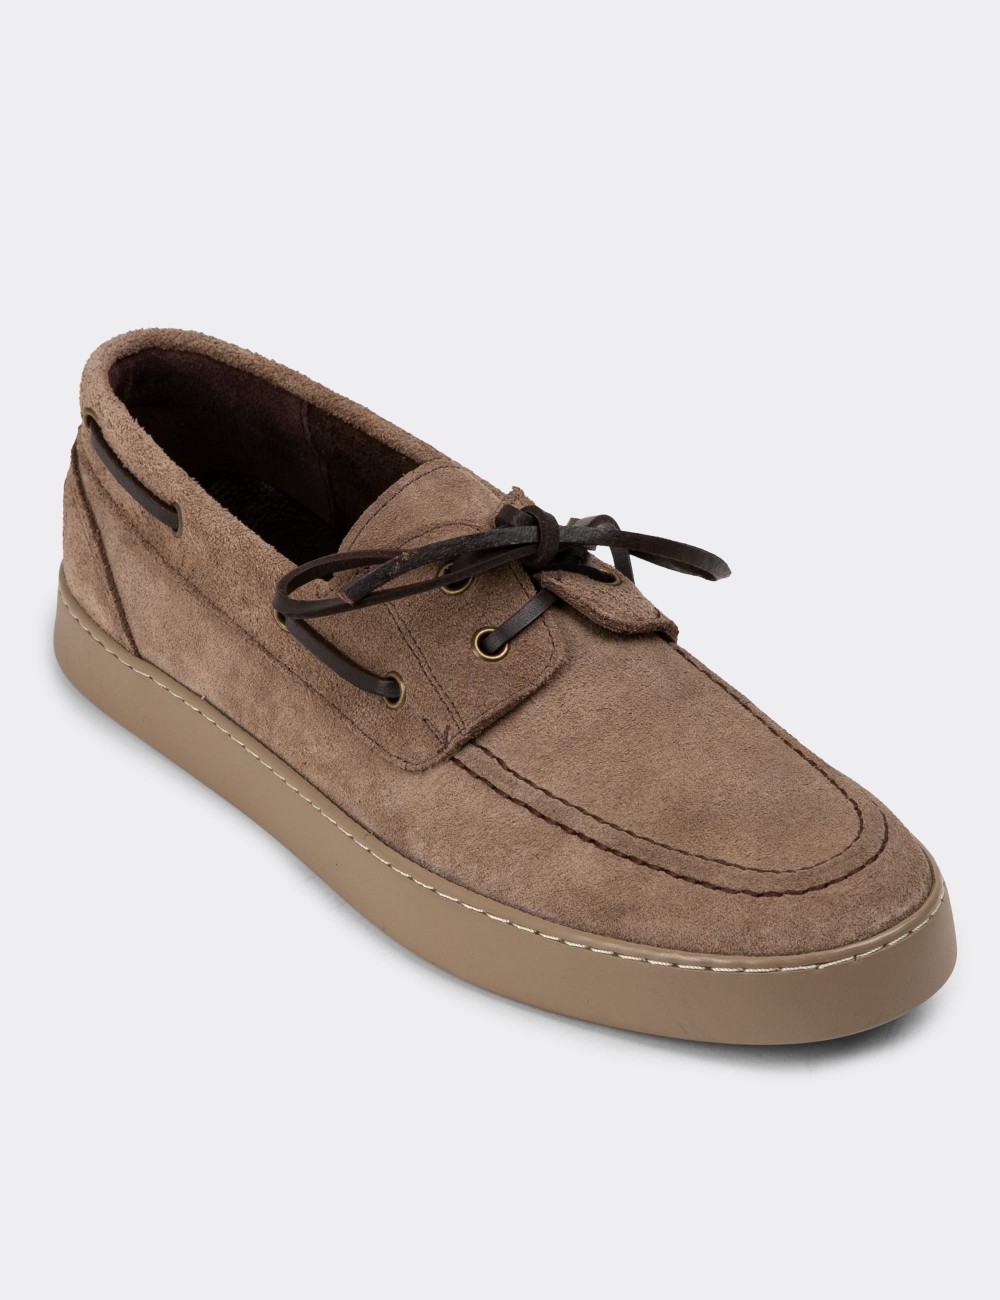 Sandstone Suede Leather Lace-up Shoes - 01952MVZNC01